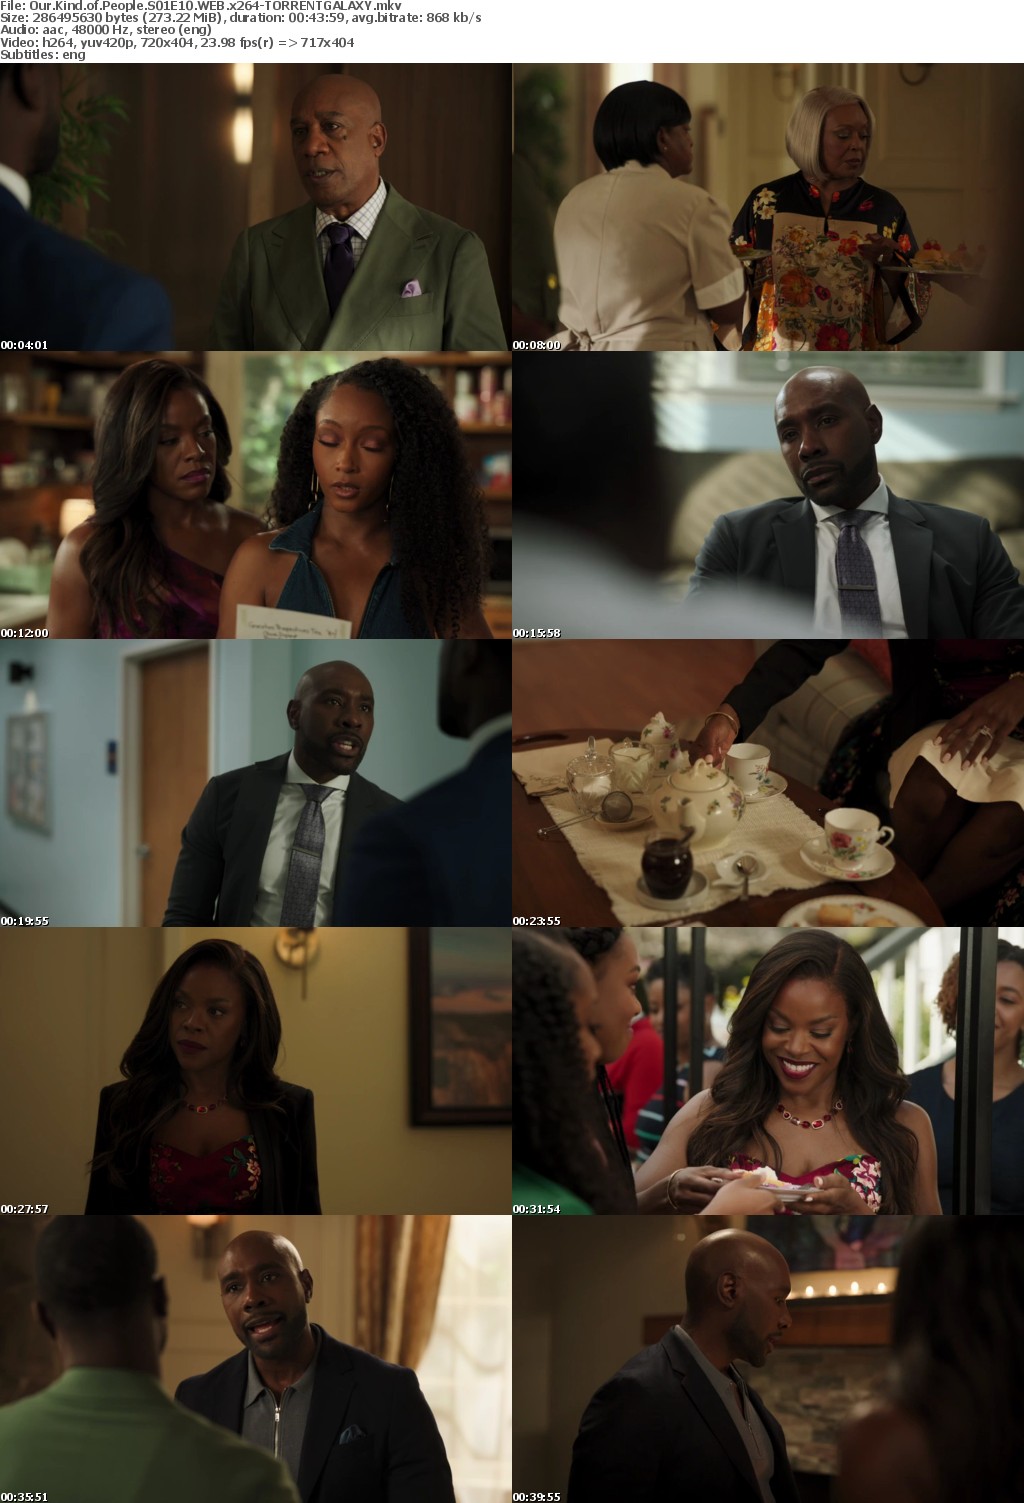 Our Kind of People S01E10 WEB x264-GALAXY